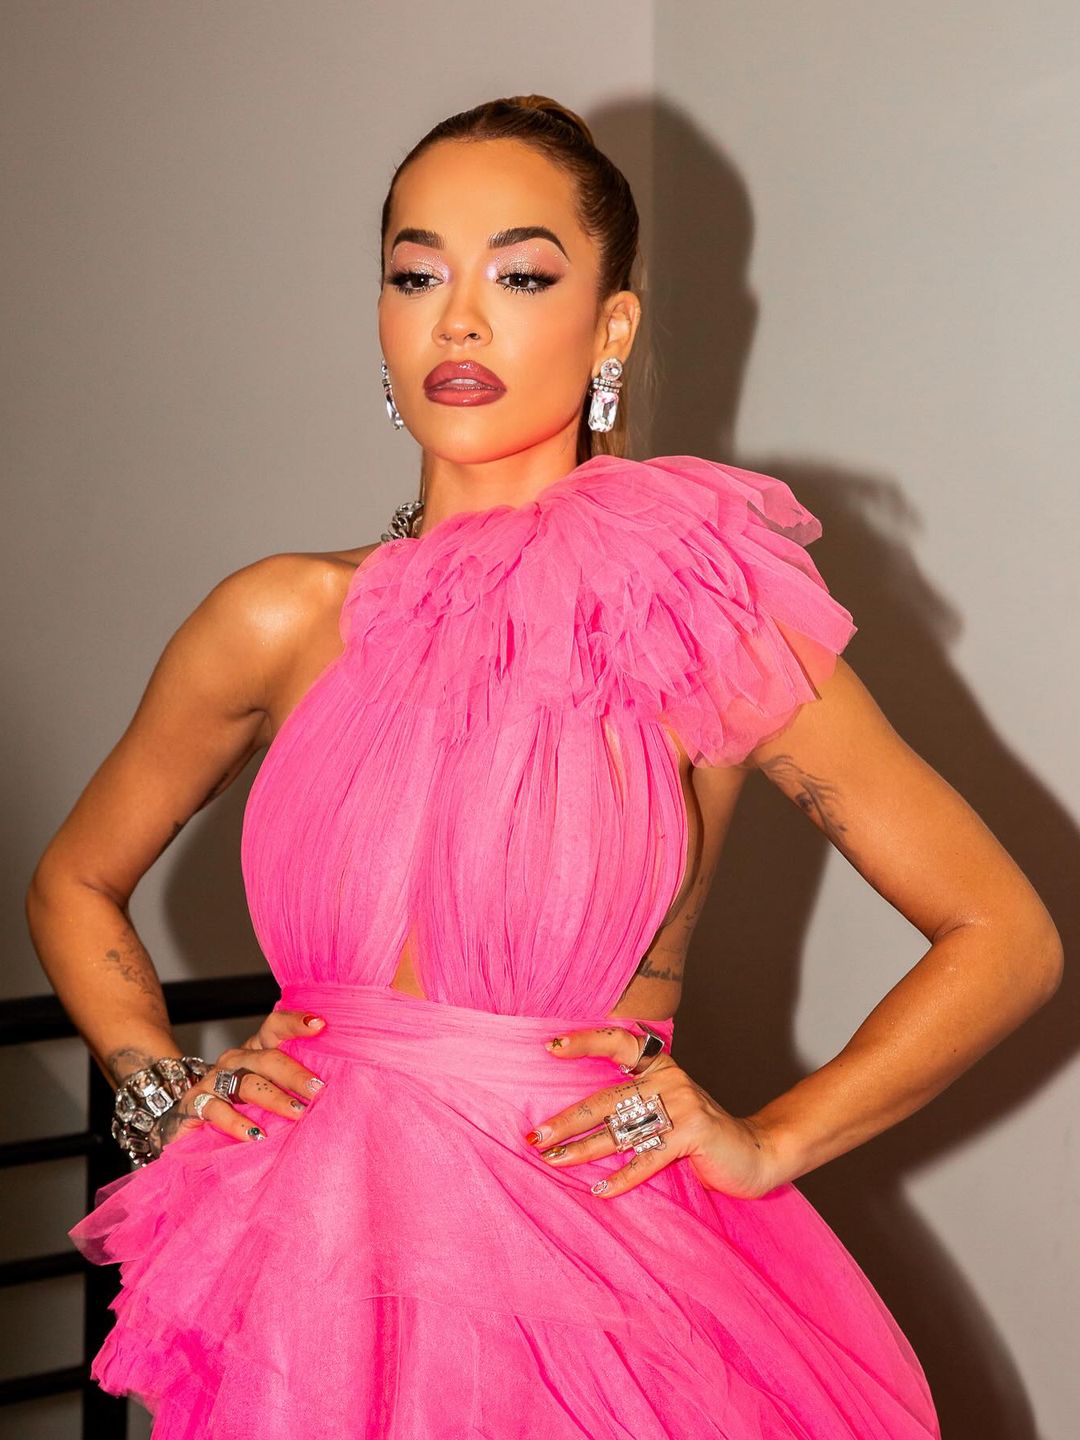 Rita Ora poses on her Instagram in a pink tulle dress